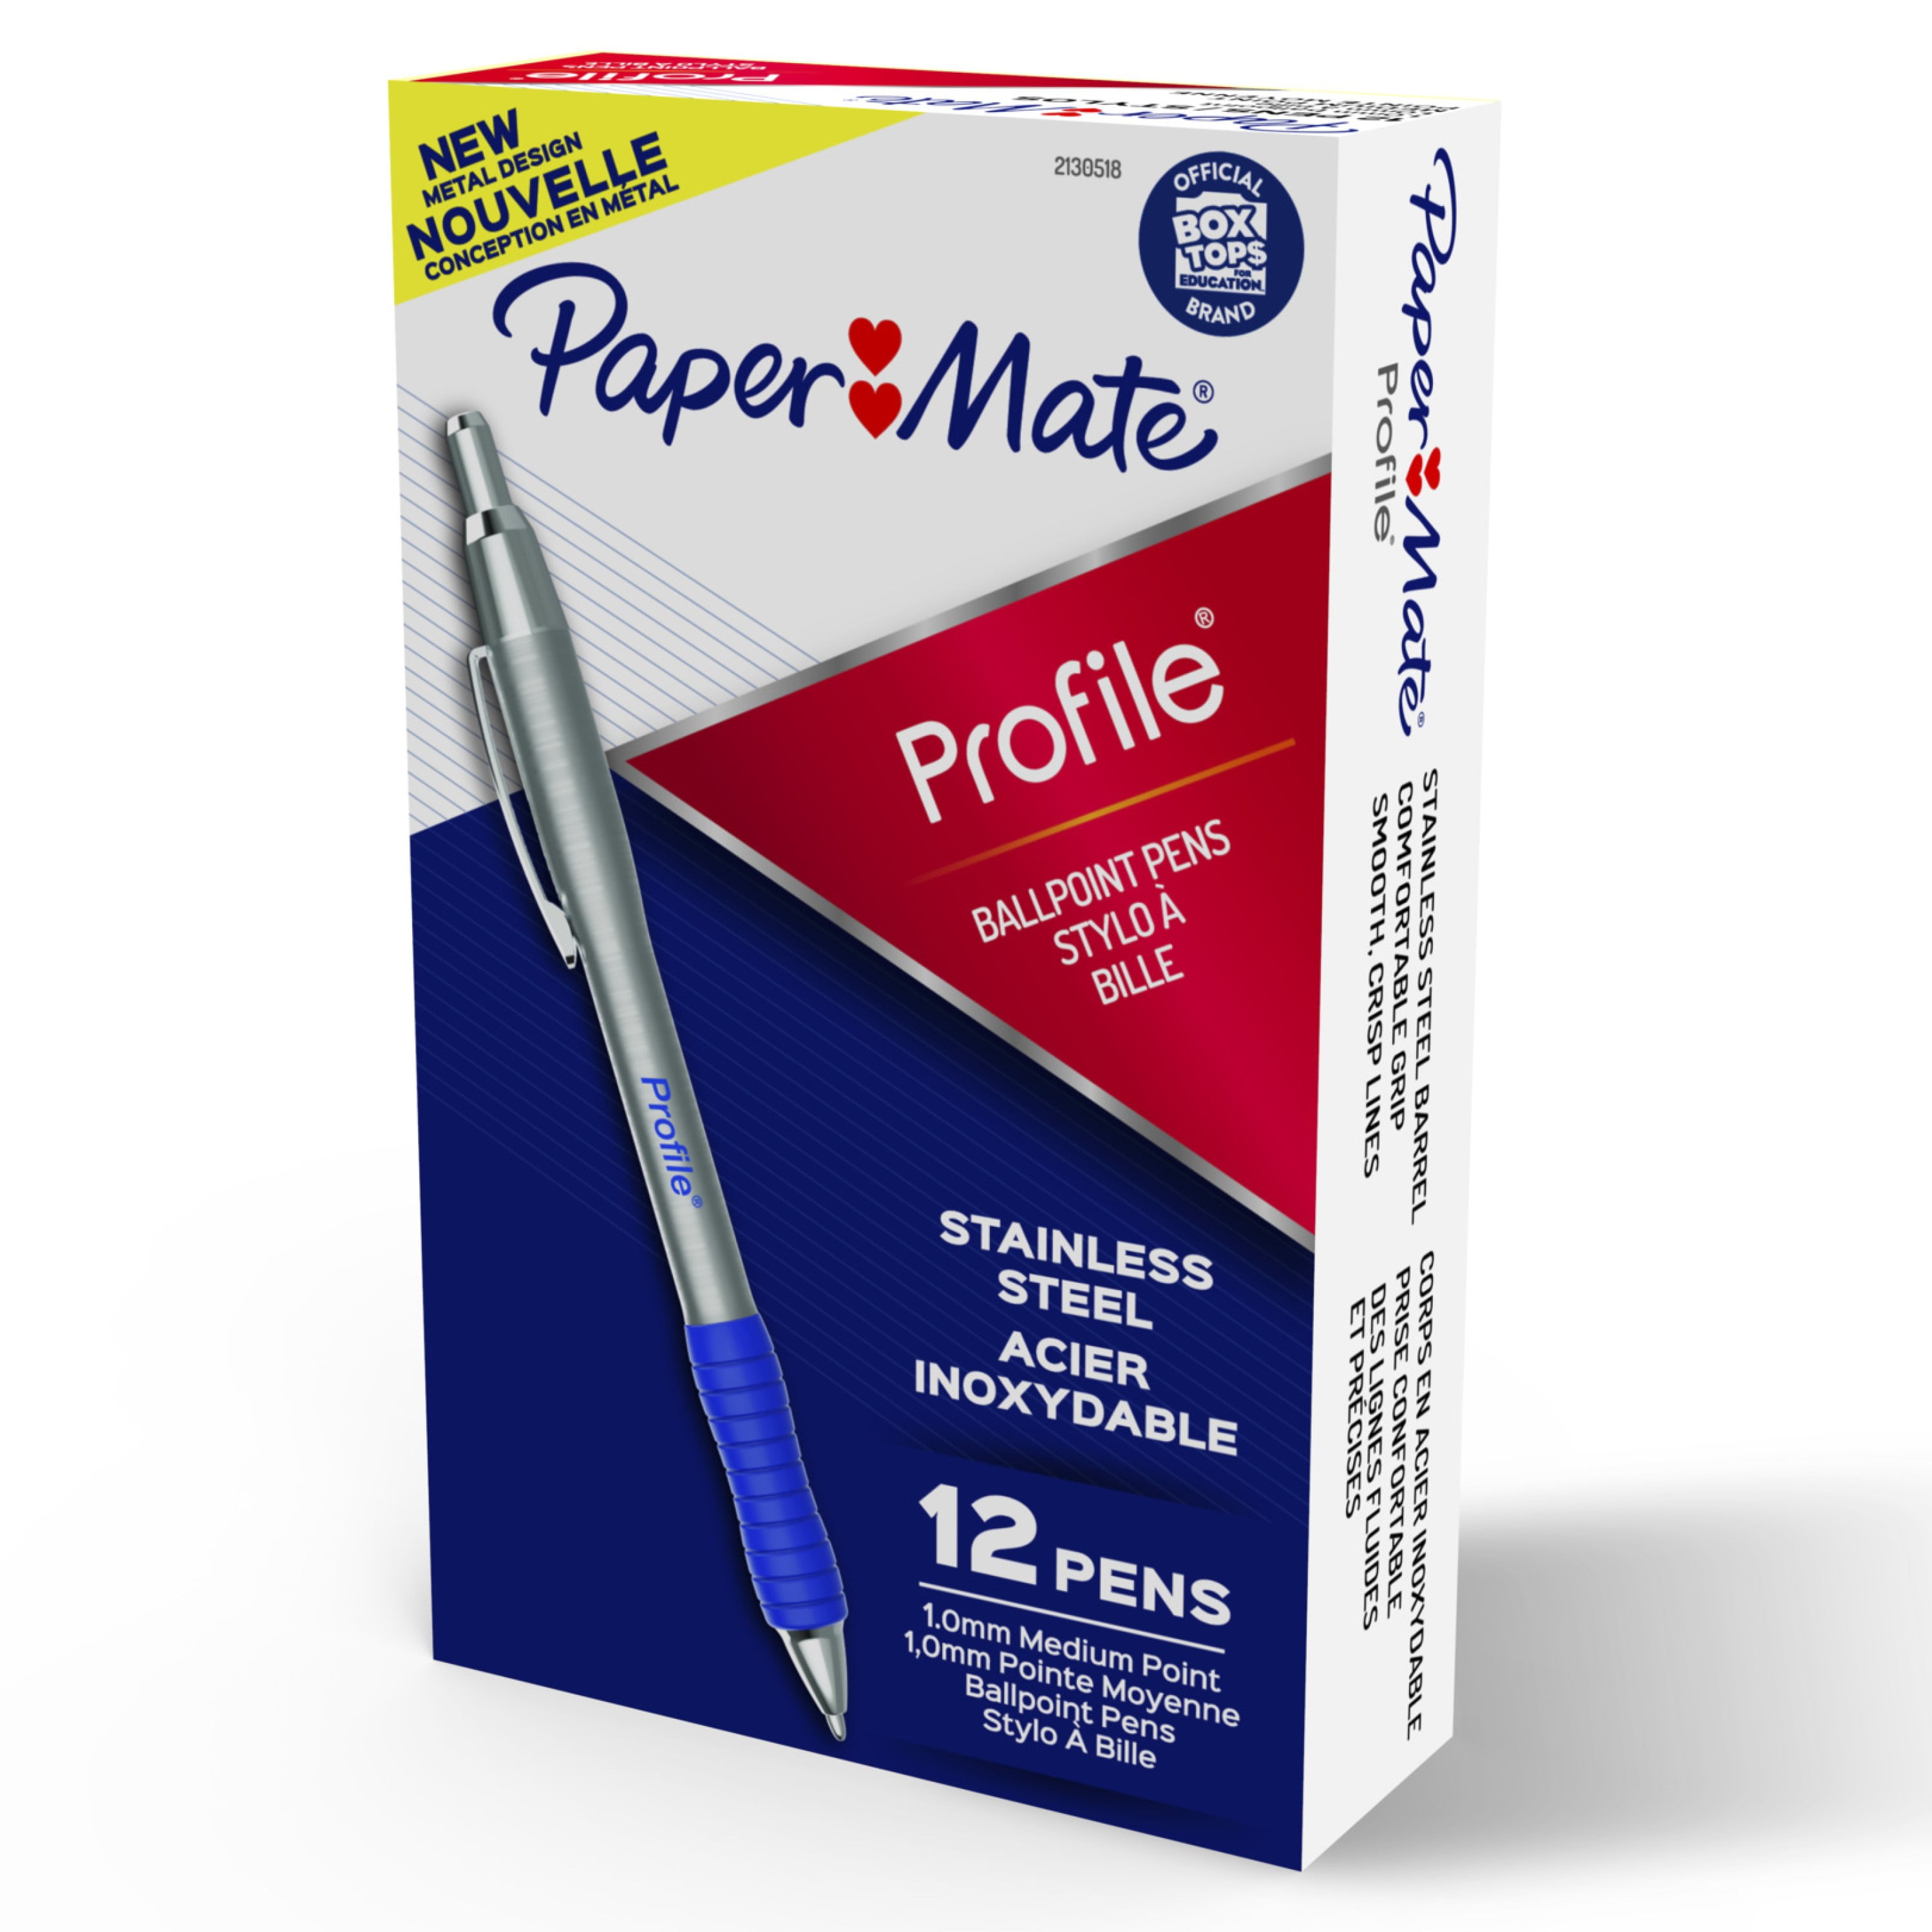 Paper Mate - Retractable Ball Point Pen: 1 mm Tip, Blue Ink - 19349281 -  MSC Industrial Supply